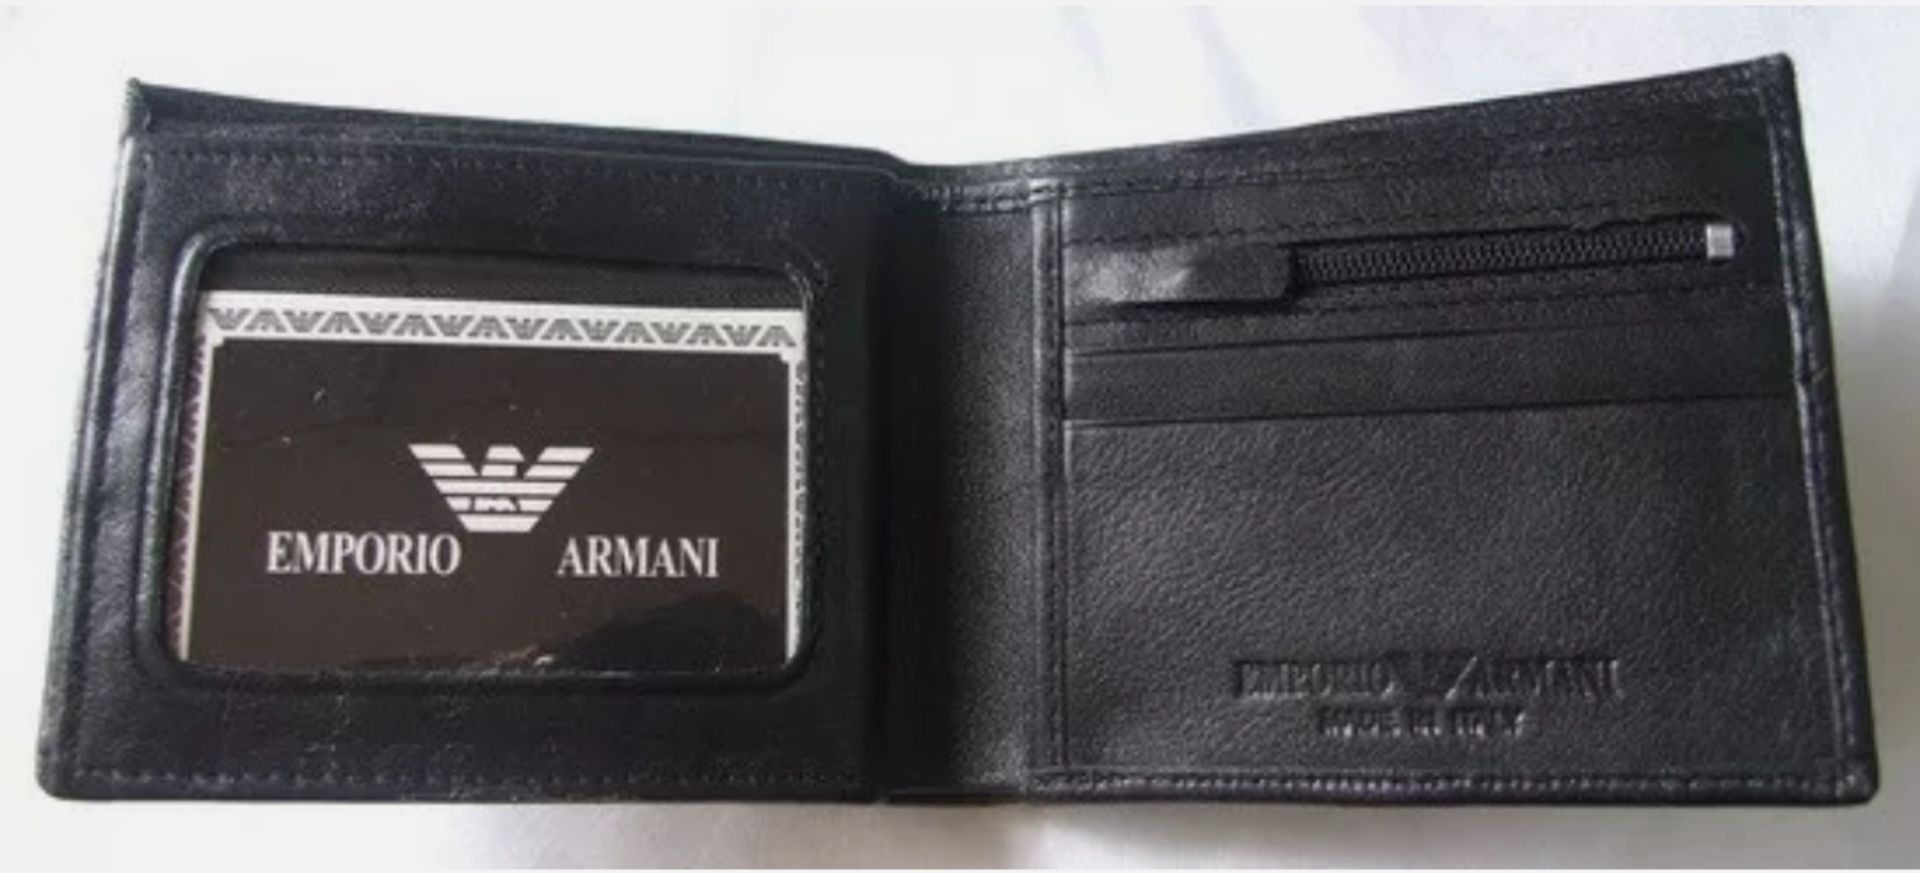 Emporio Armani Men's Leather Wallet - New With Box - Image 5 of 6